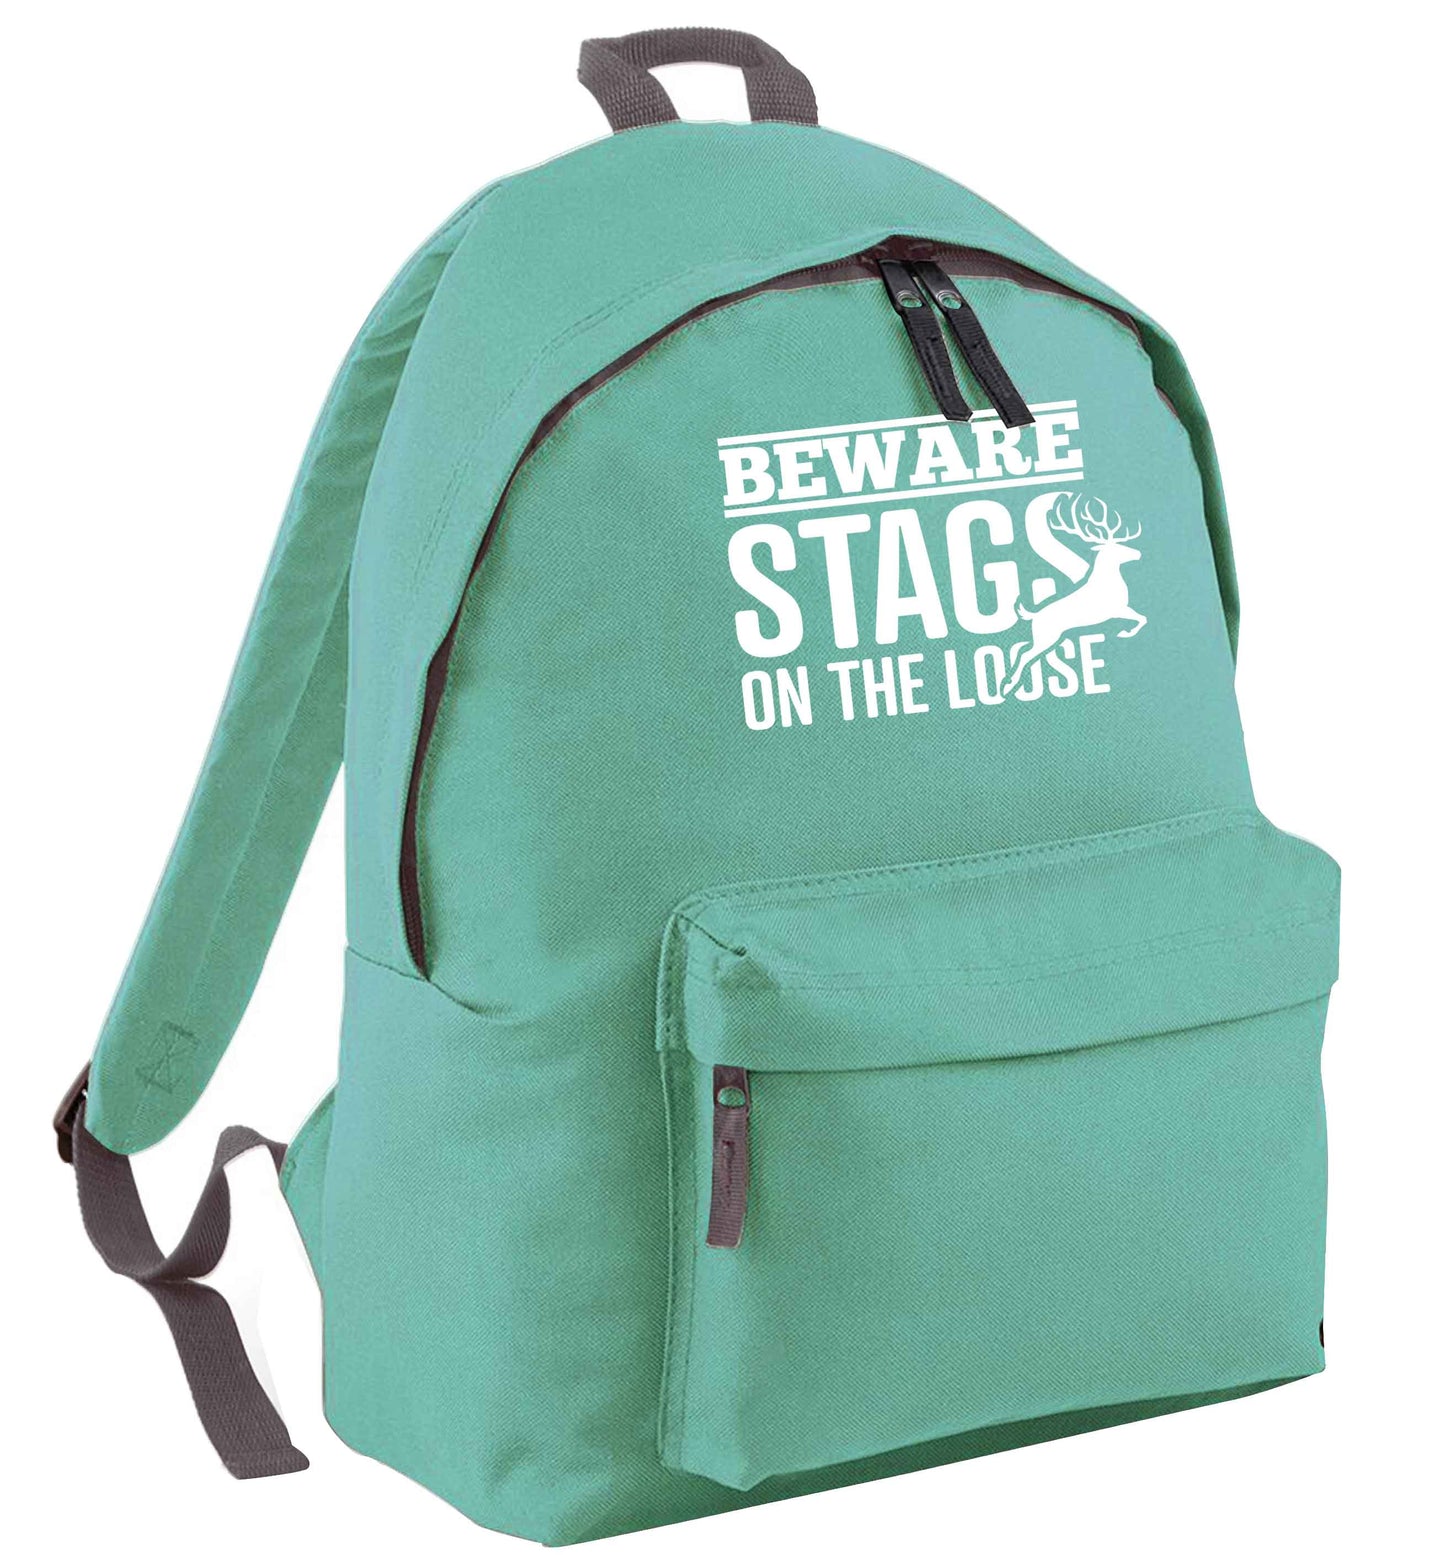 Beware stags on the loose mint adults backpack